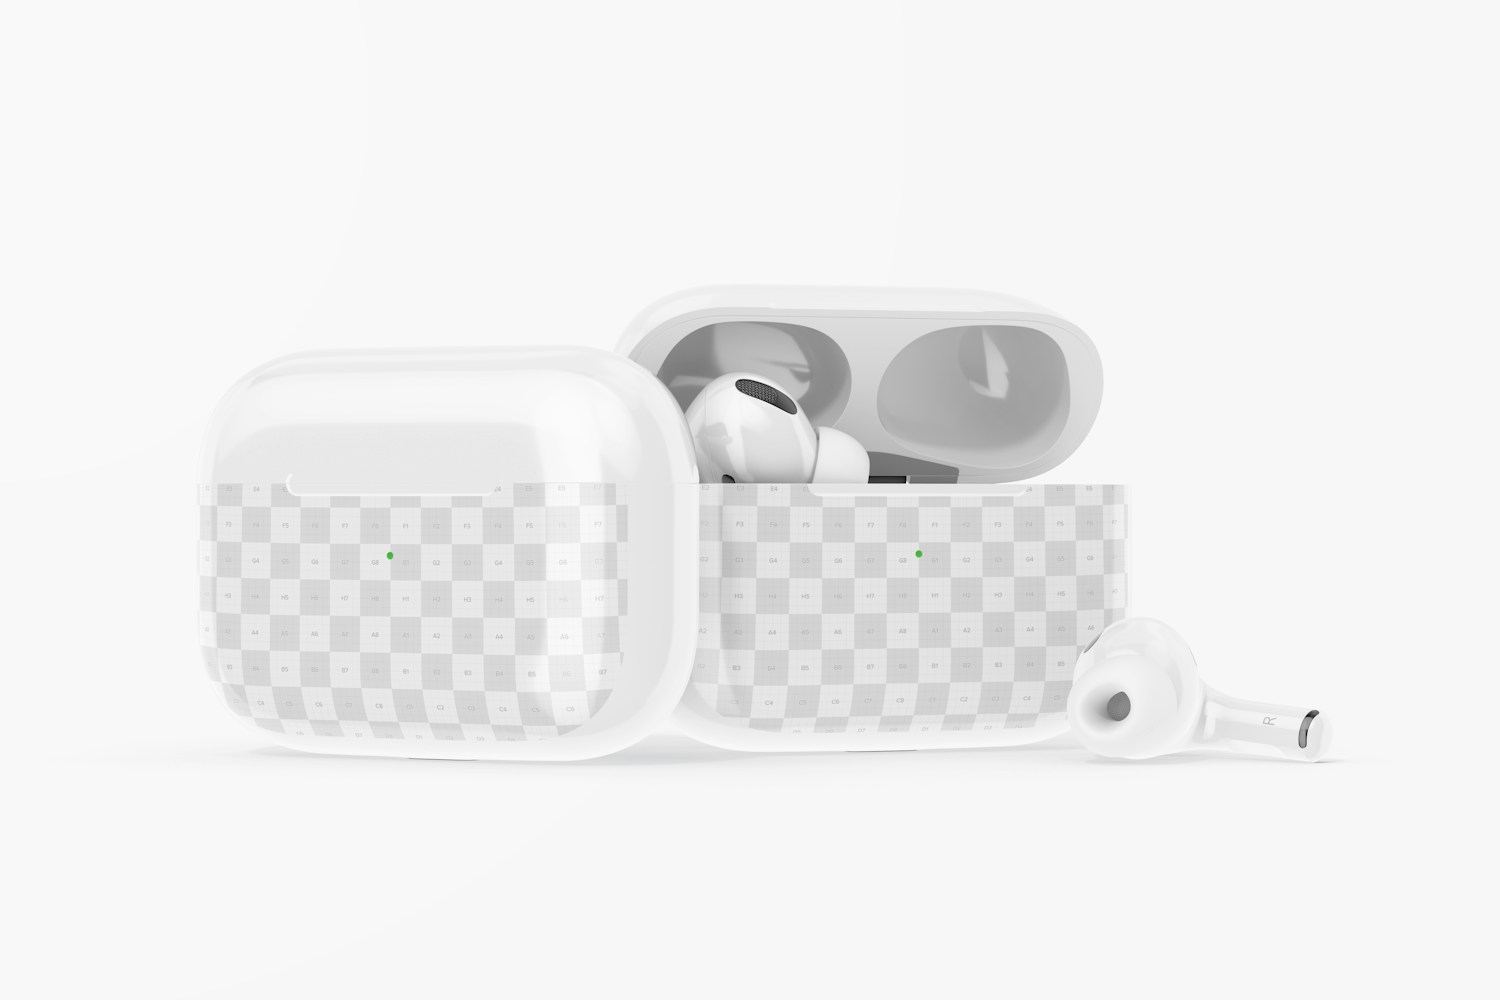 Clay AirPods Pro Mockup, Opened and Closed